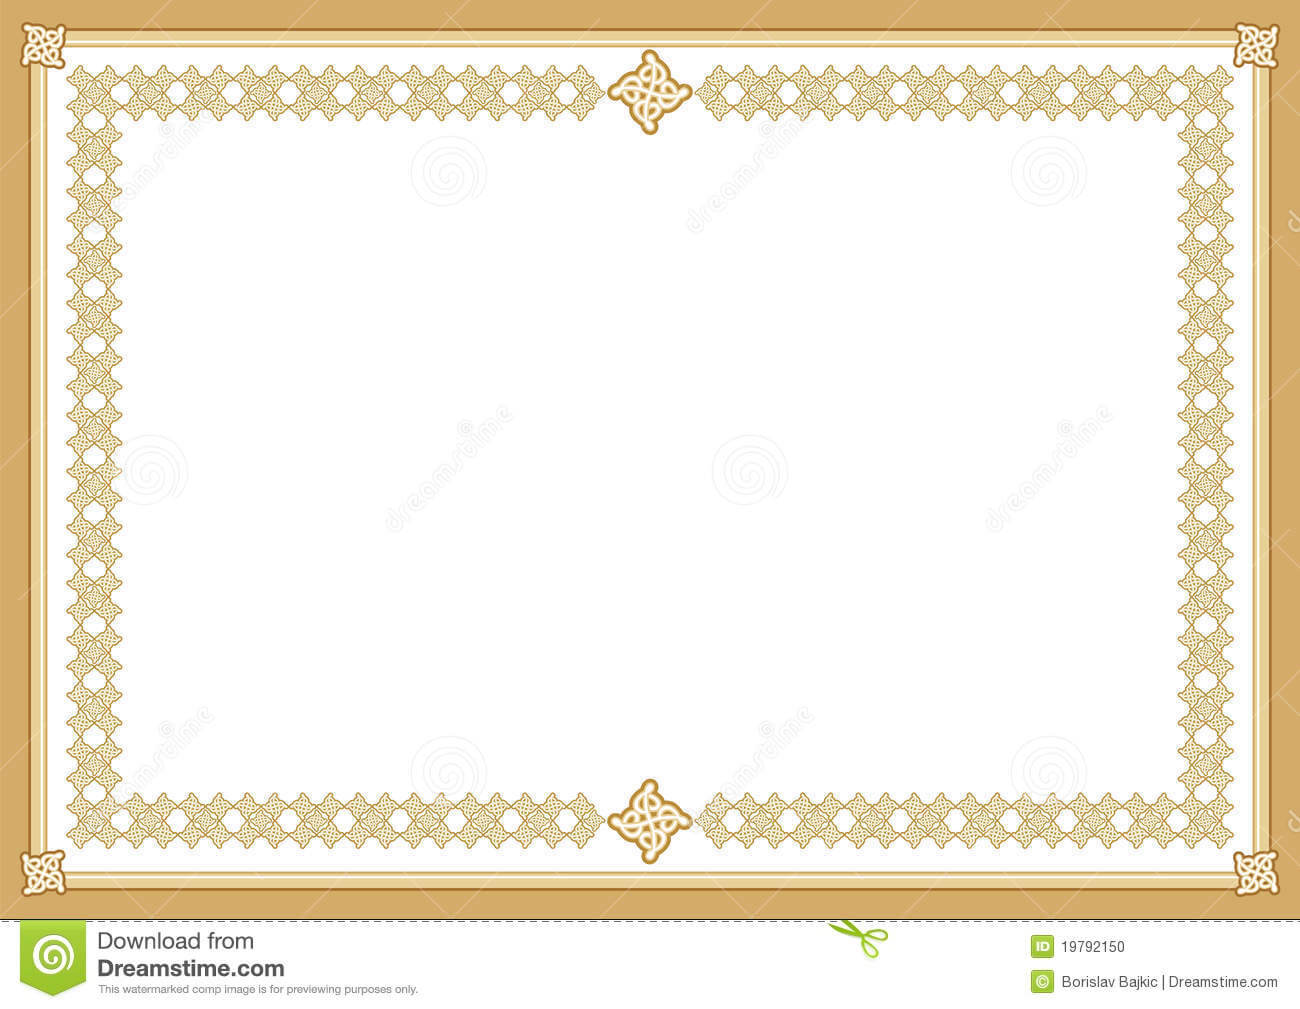 Certificate Stock Vector. Illustration Of Award, Blank With Regard To Award Certificate Border Template